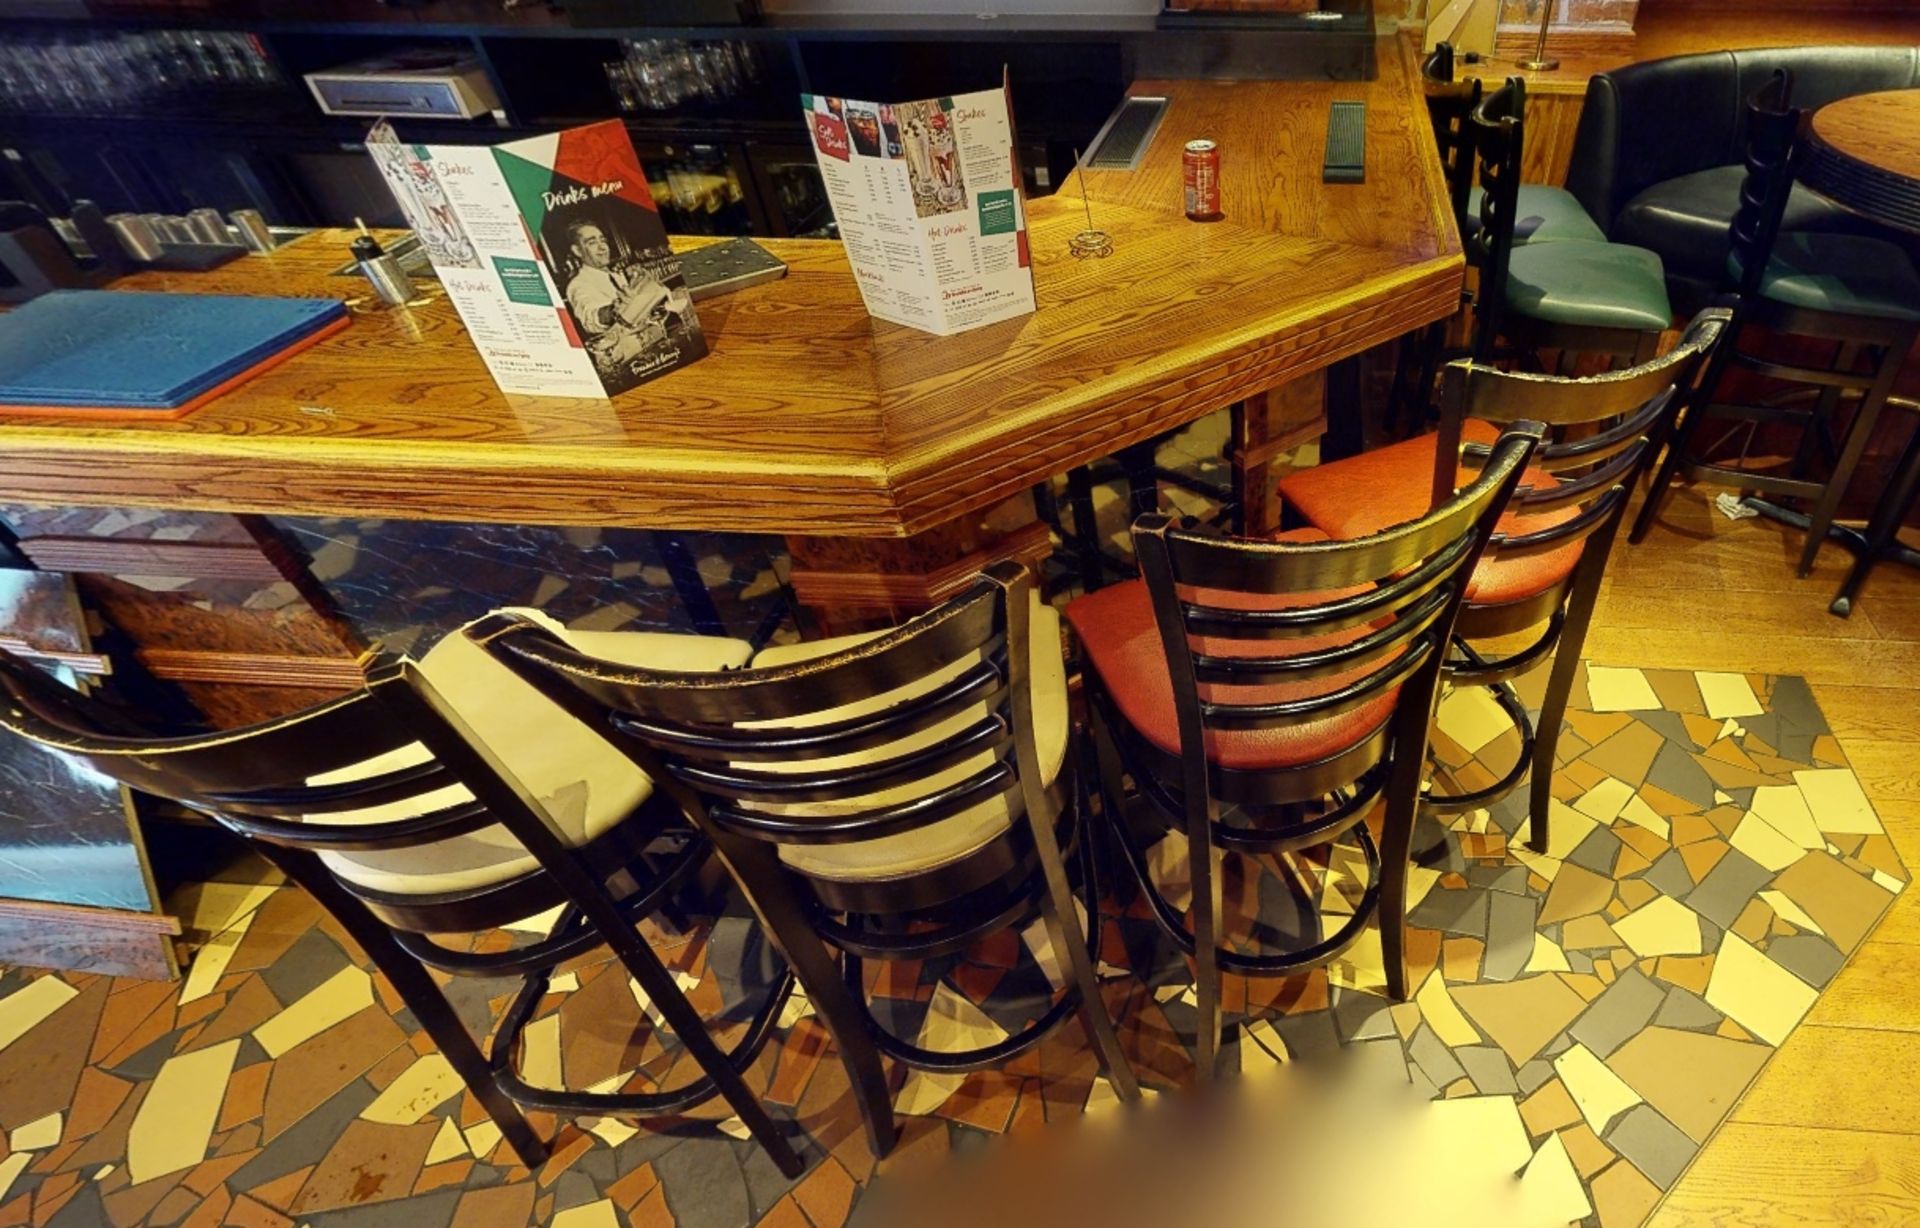 6 x Restaurant Bar Stools - Black Finish With Various Coloured Seat Pads - Image 5 of 5